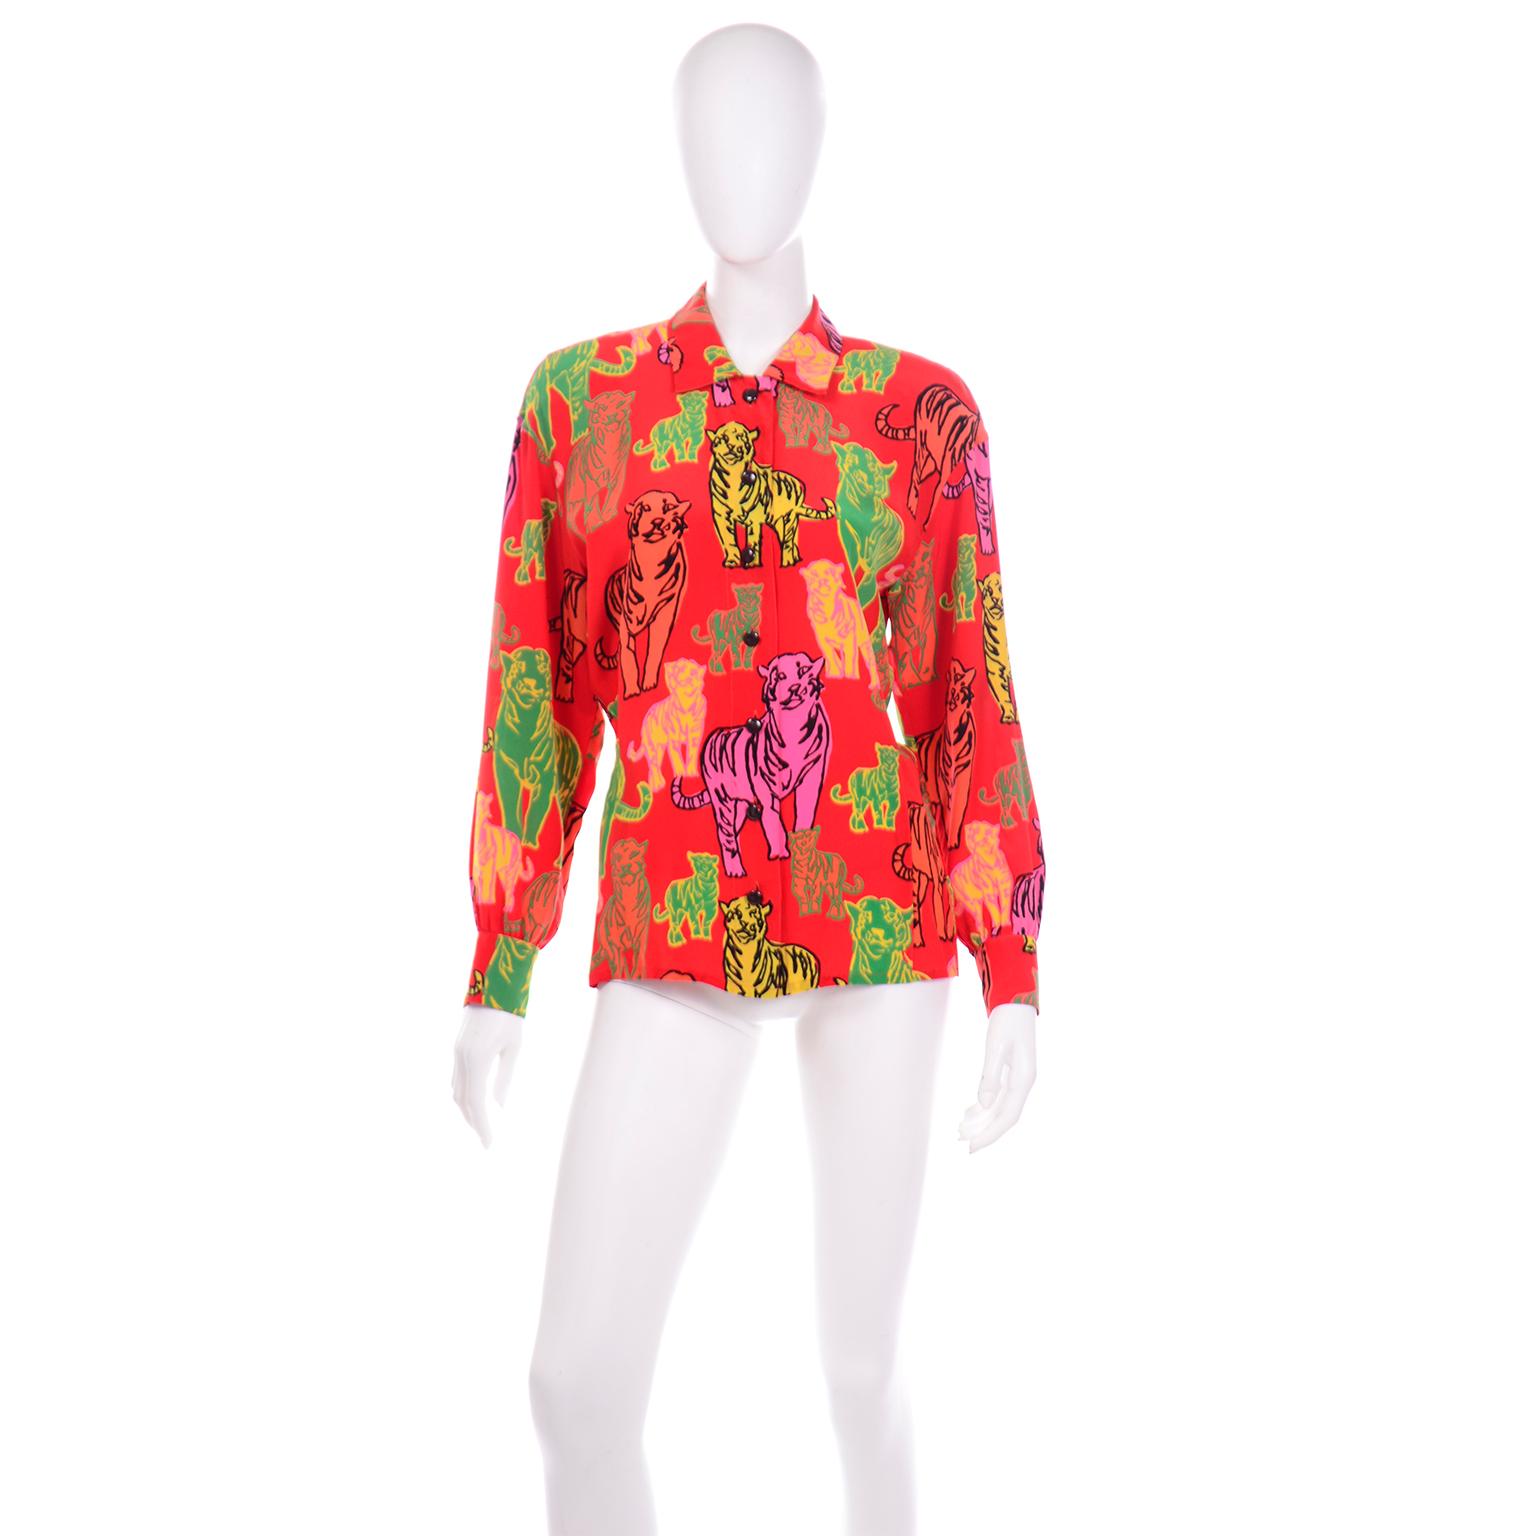 This fun blouse from Escada was designed by the late Margaretha Ley during the 1980s. Ley was passionate about novelty prints, especially those with animals, a recurring theme in her creations. This iconic print stands as one of Escada's most